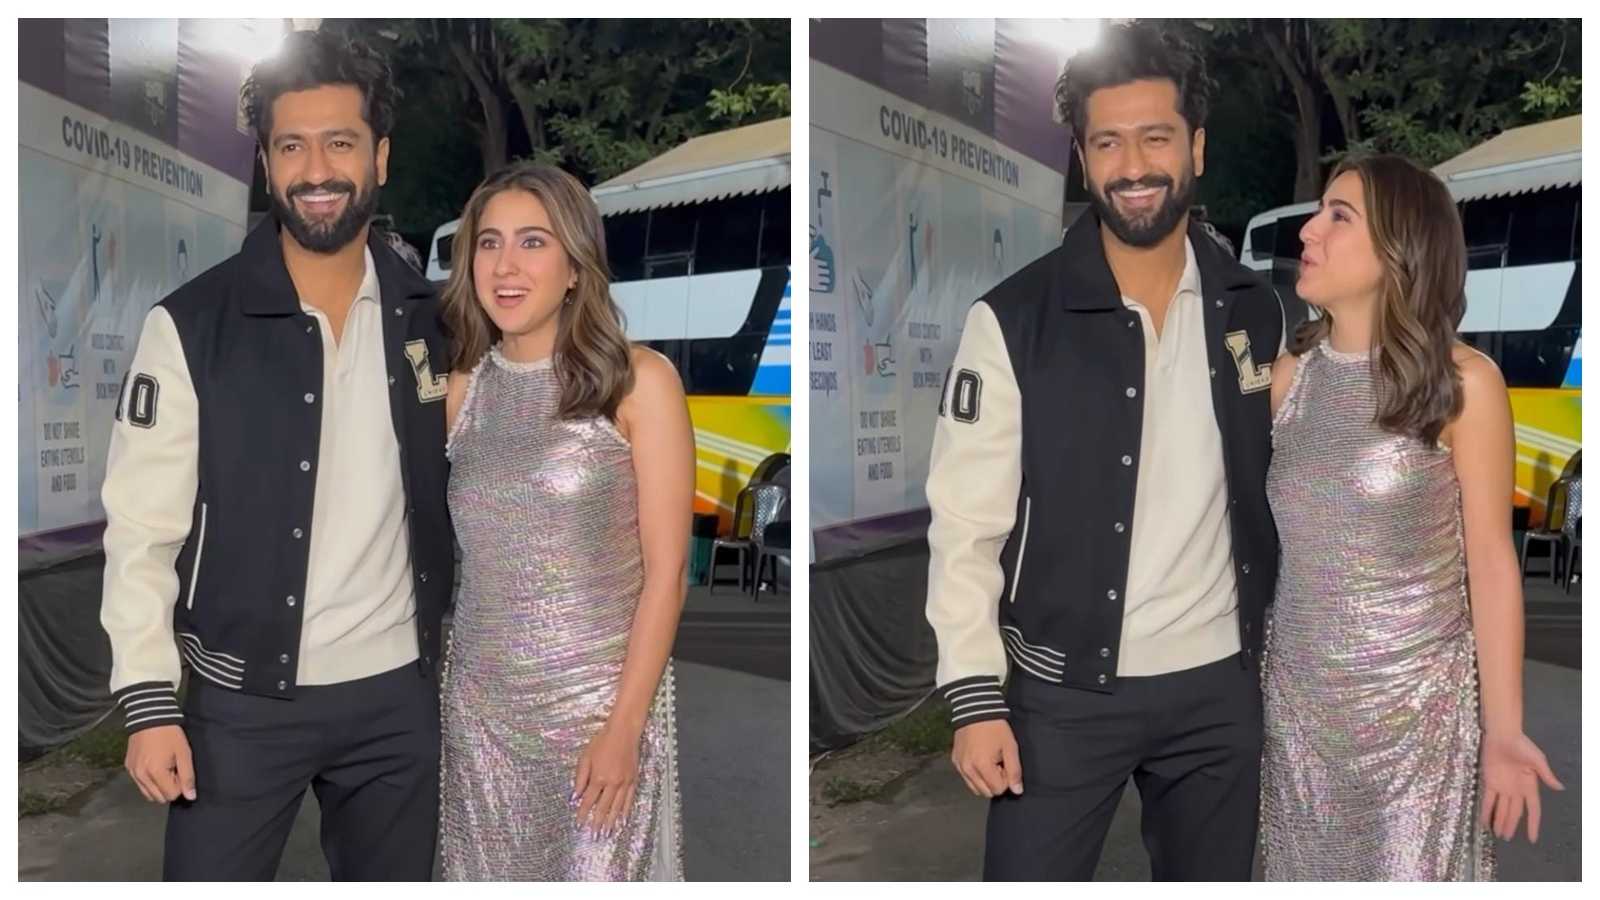 ‘That’s so mean’: Sara Ali Khan reacts to paps asking ‘Thak gaye kya’ as she poses with Vicky Kaushal